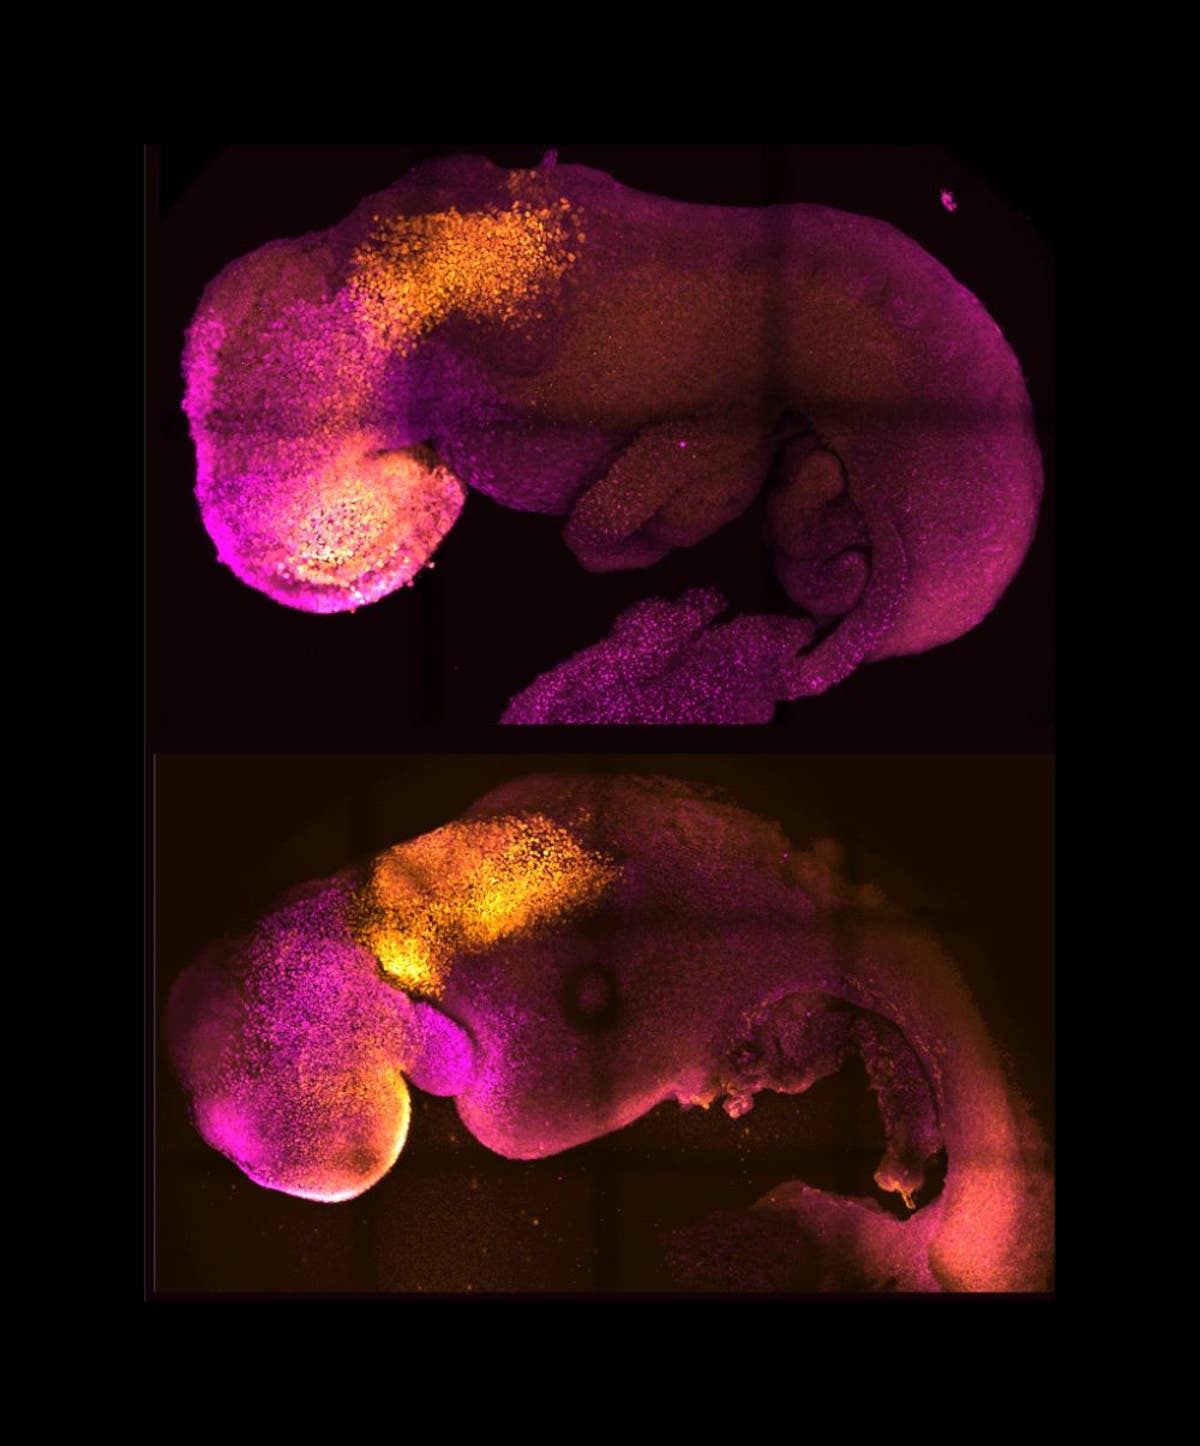 Synthetic embryo with brain and beating heart grown from mouse cells